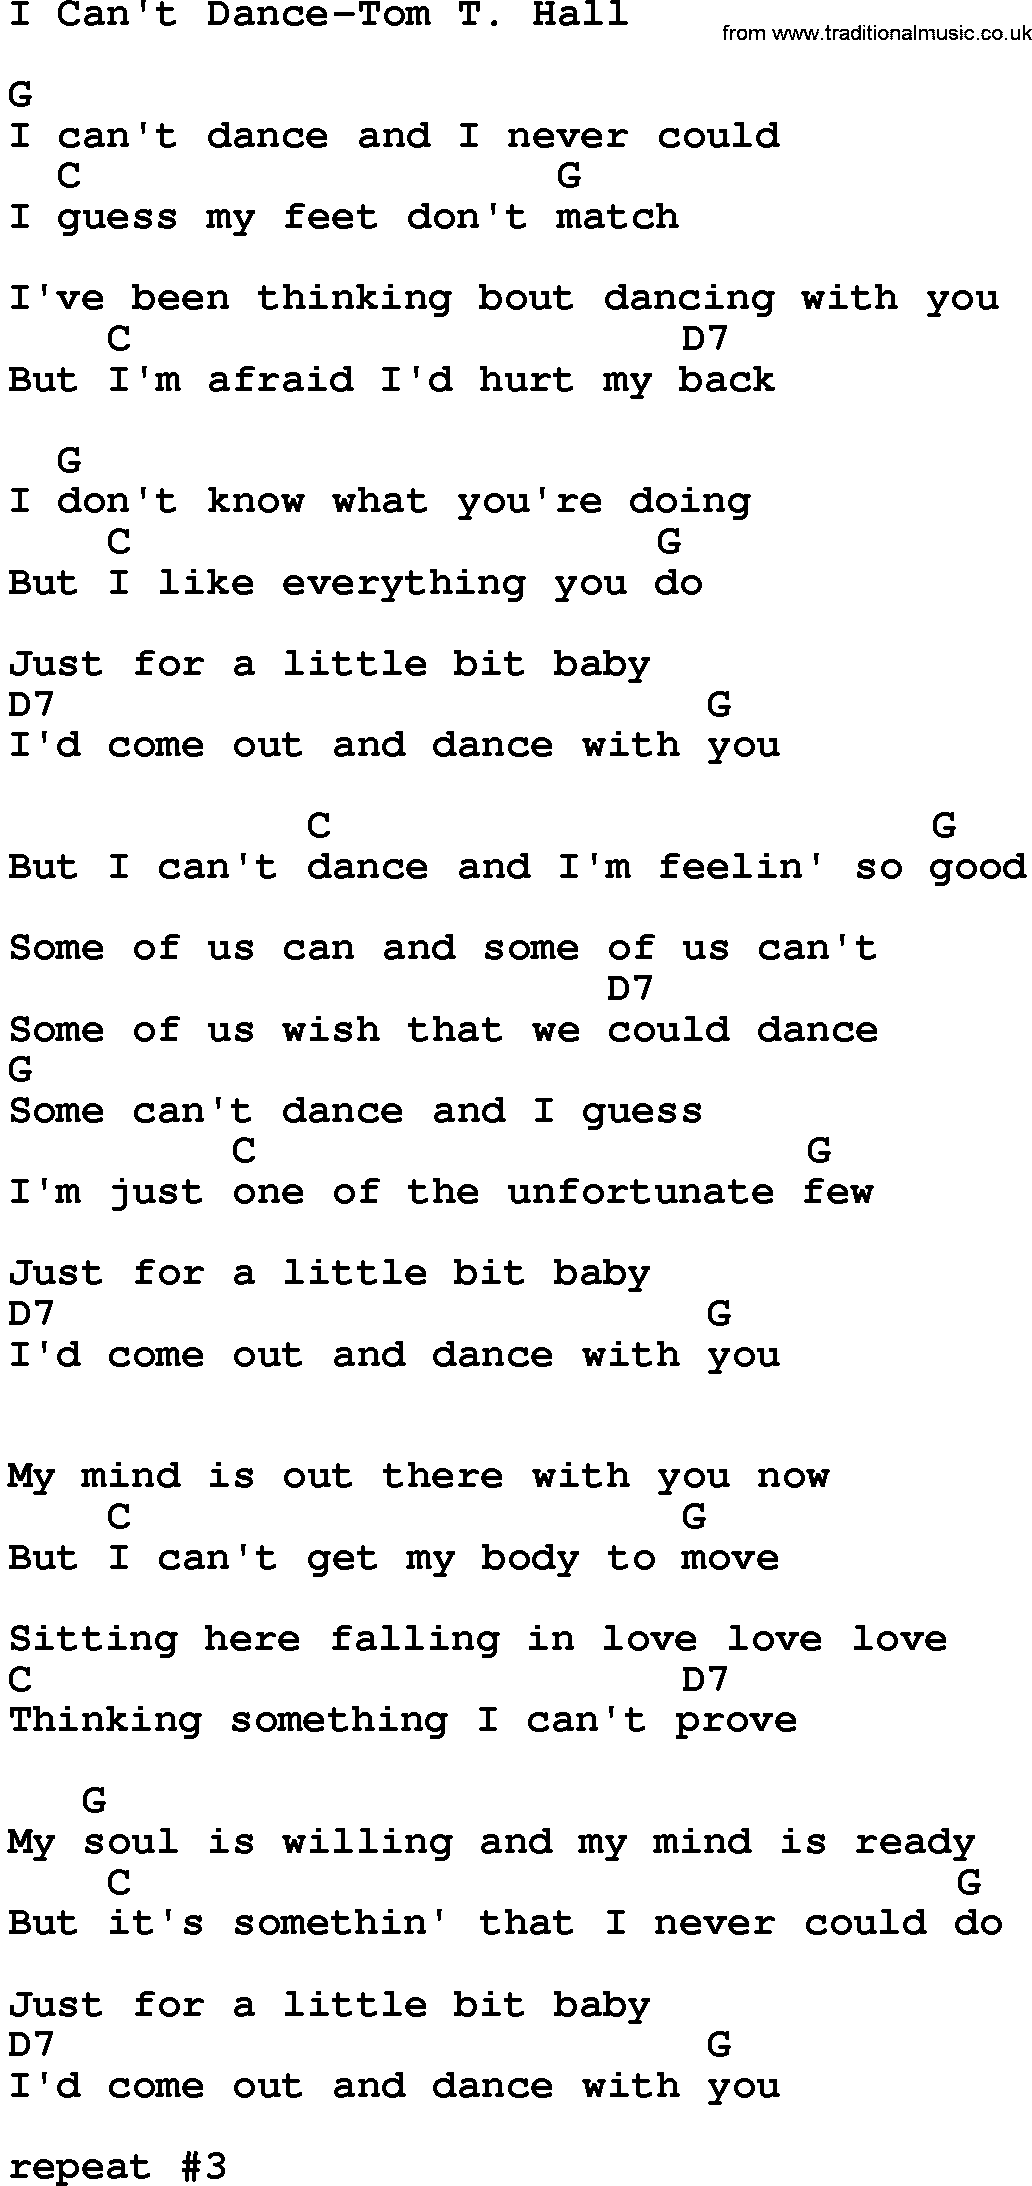 Country music song: I Can't Dance-Tom T Hall lyrics and chords